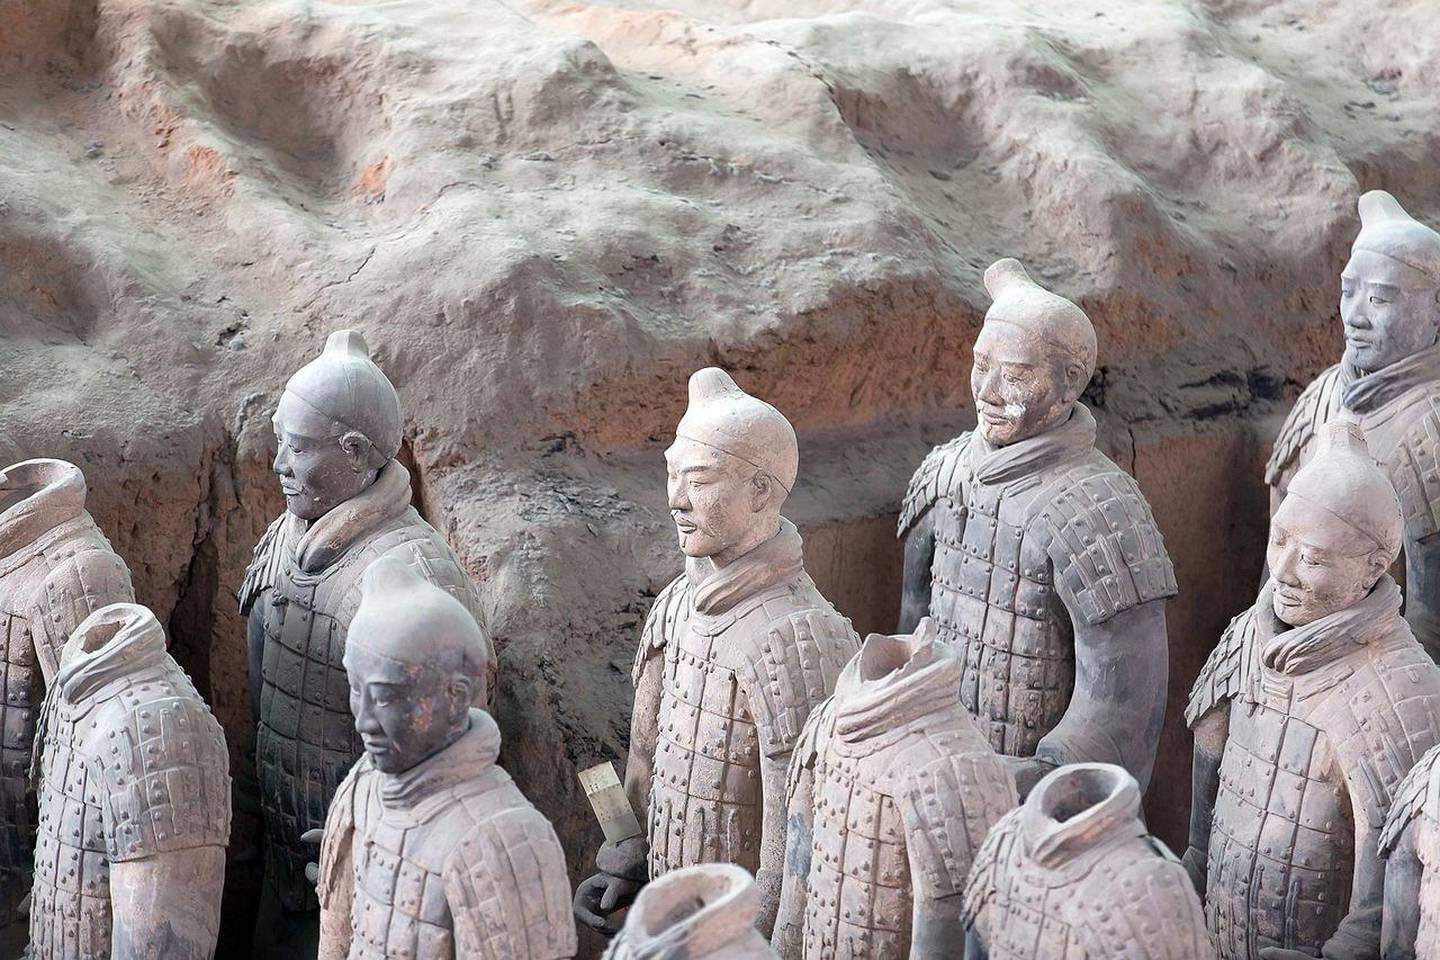 China Eastern has launched three weekly flights between Dubai and Xi'an where travellers can visit the Terracotta Army